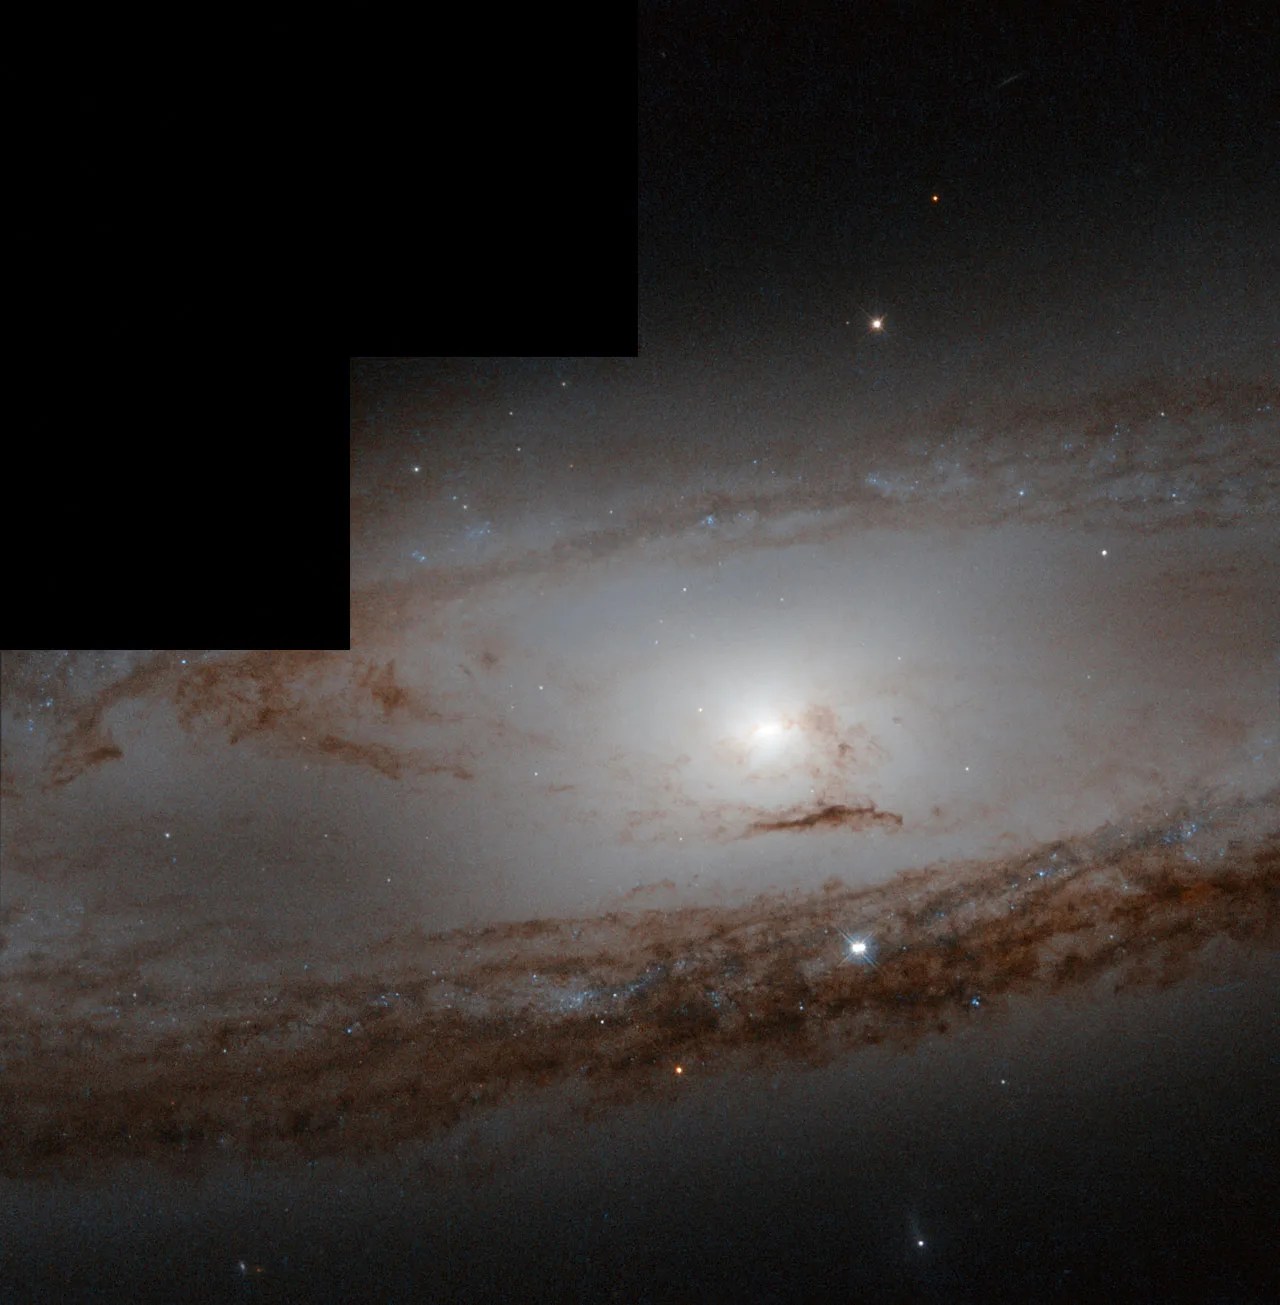 Classic stepped hubble image of milky white galaxy with rusty dust lanes